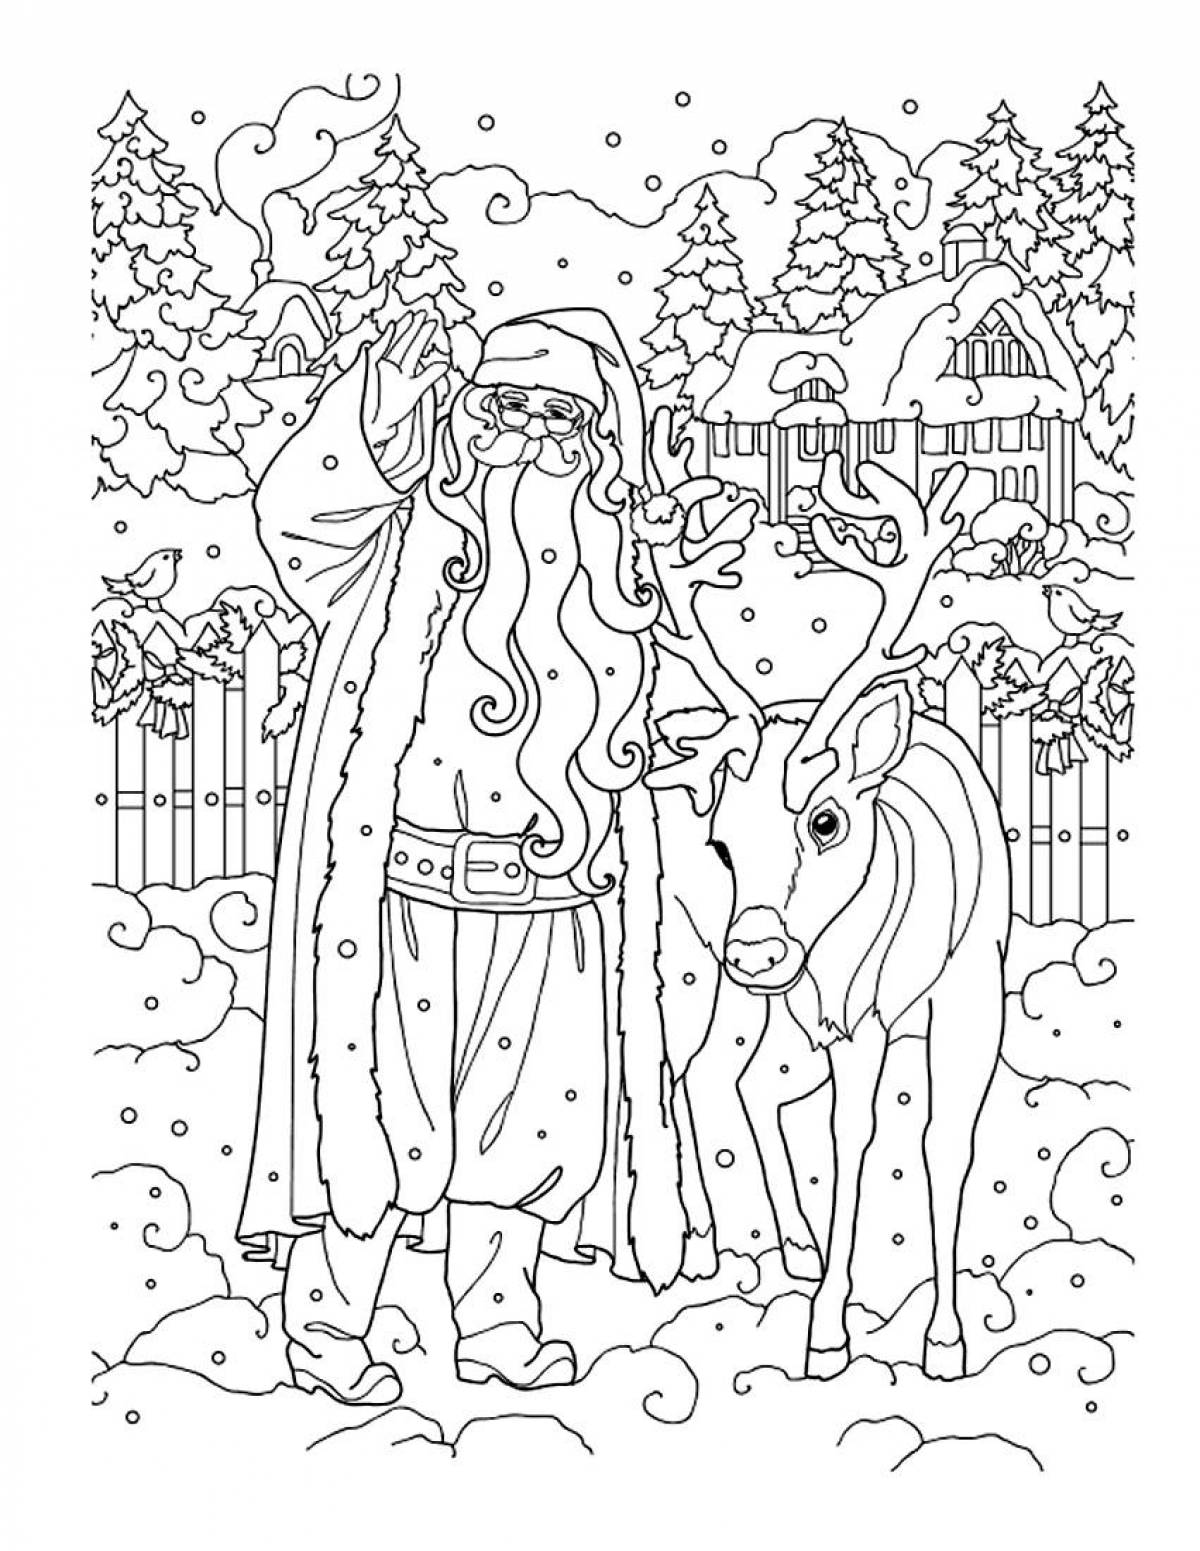 Exquisite Christmas complex coloring book